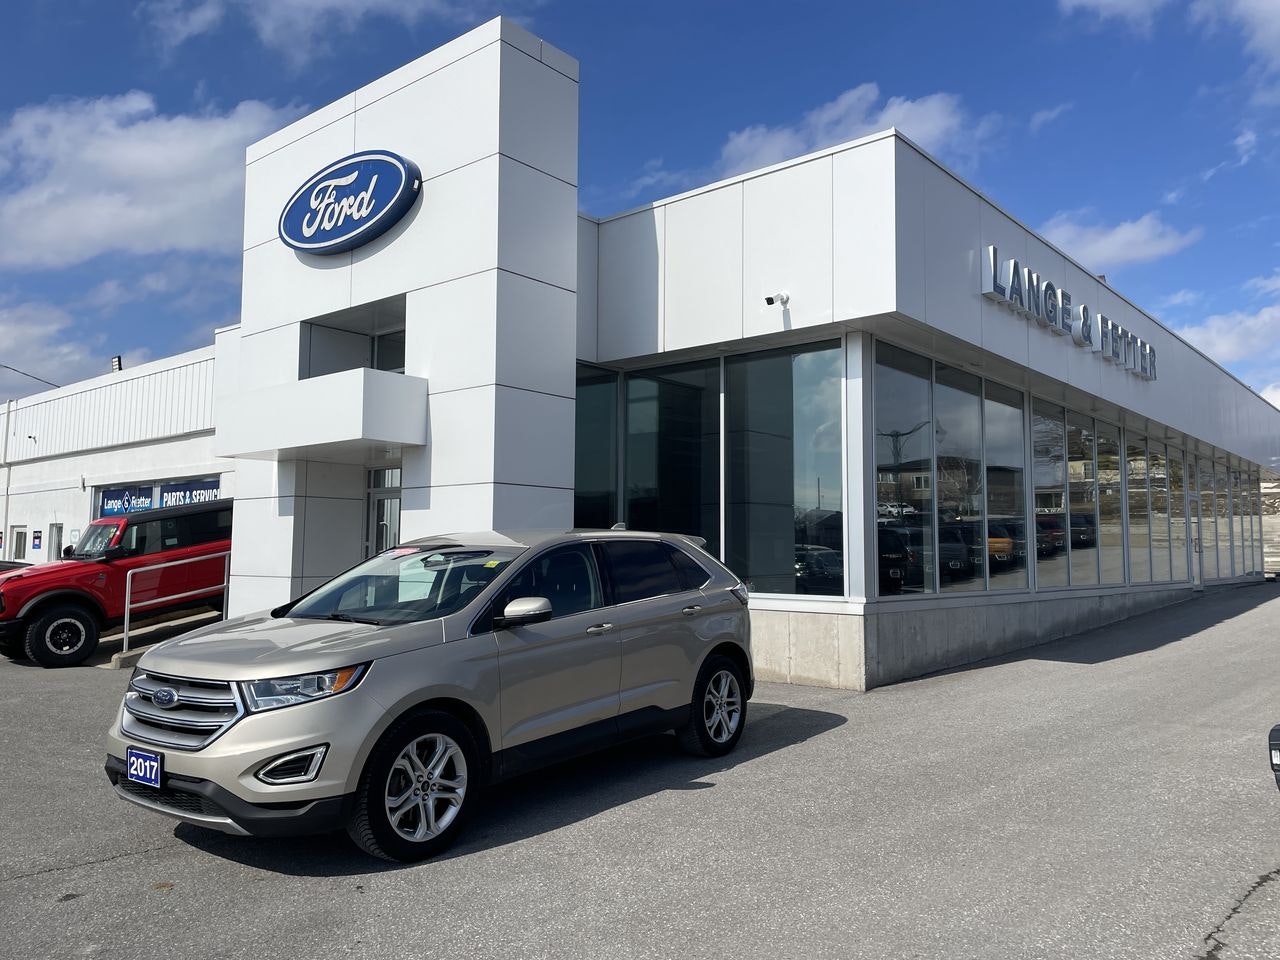 2017 Ford Edge - 21473A Full Image 1